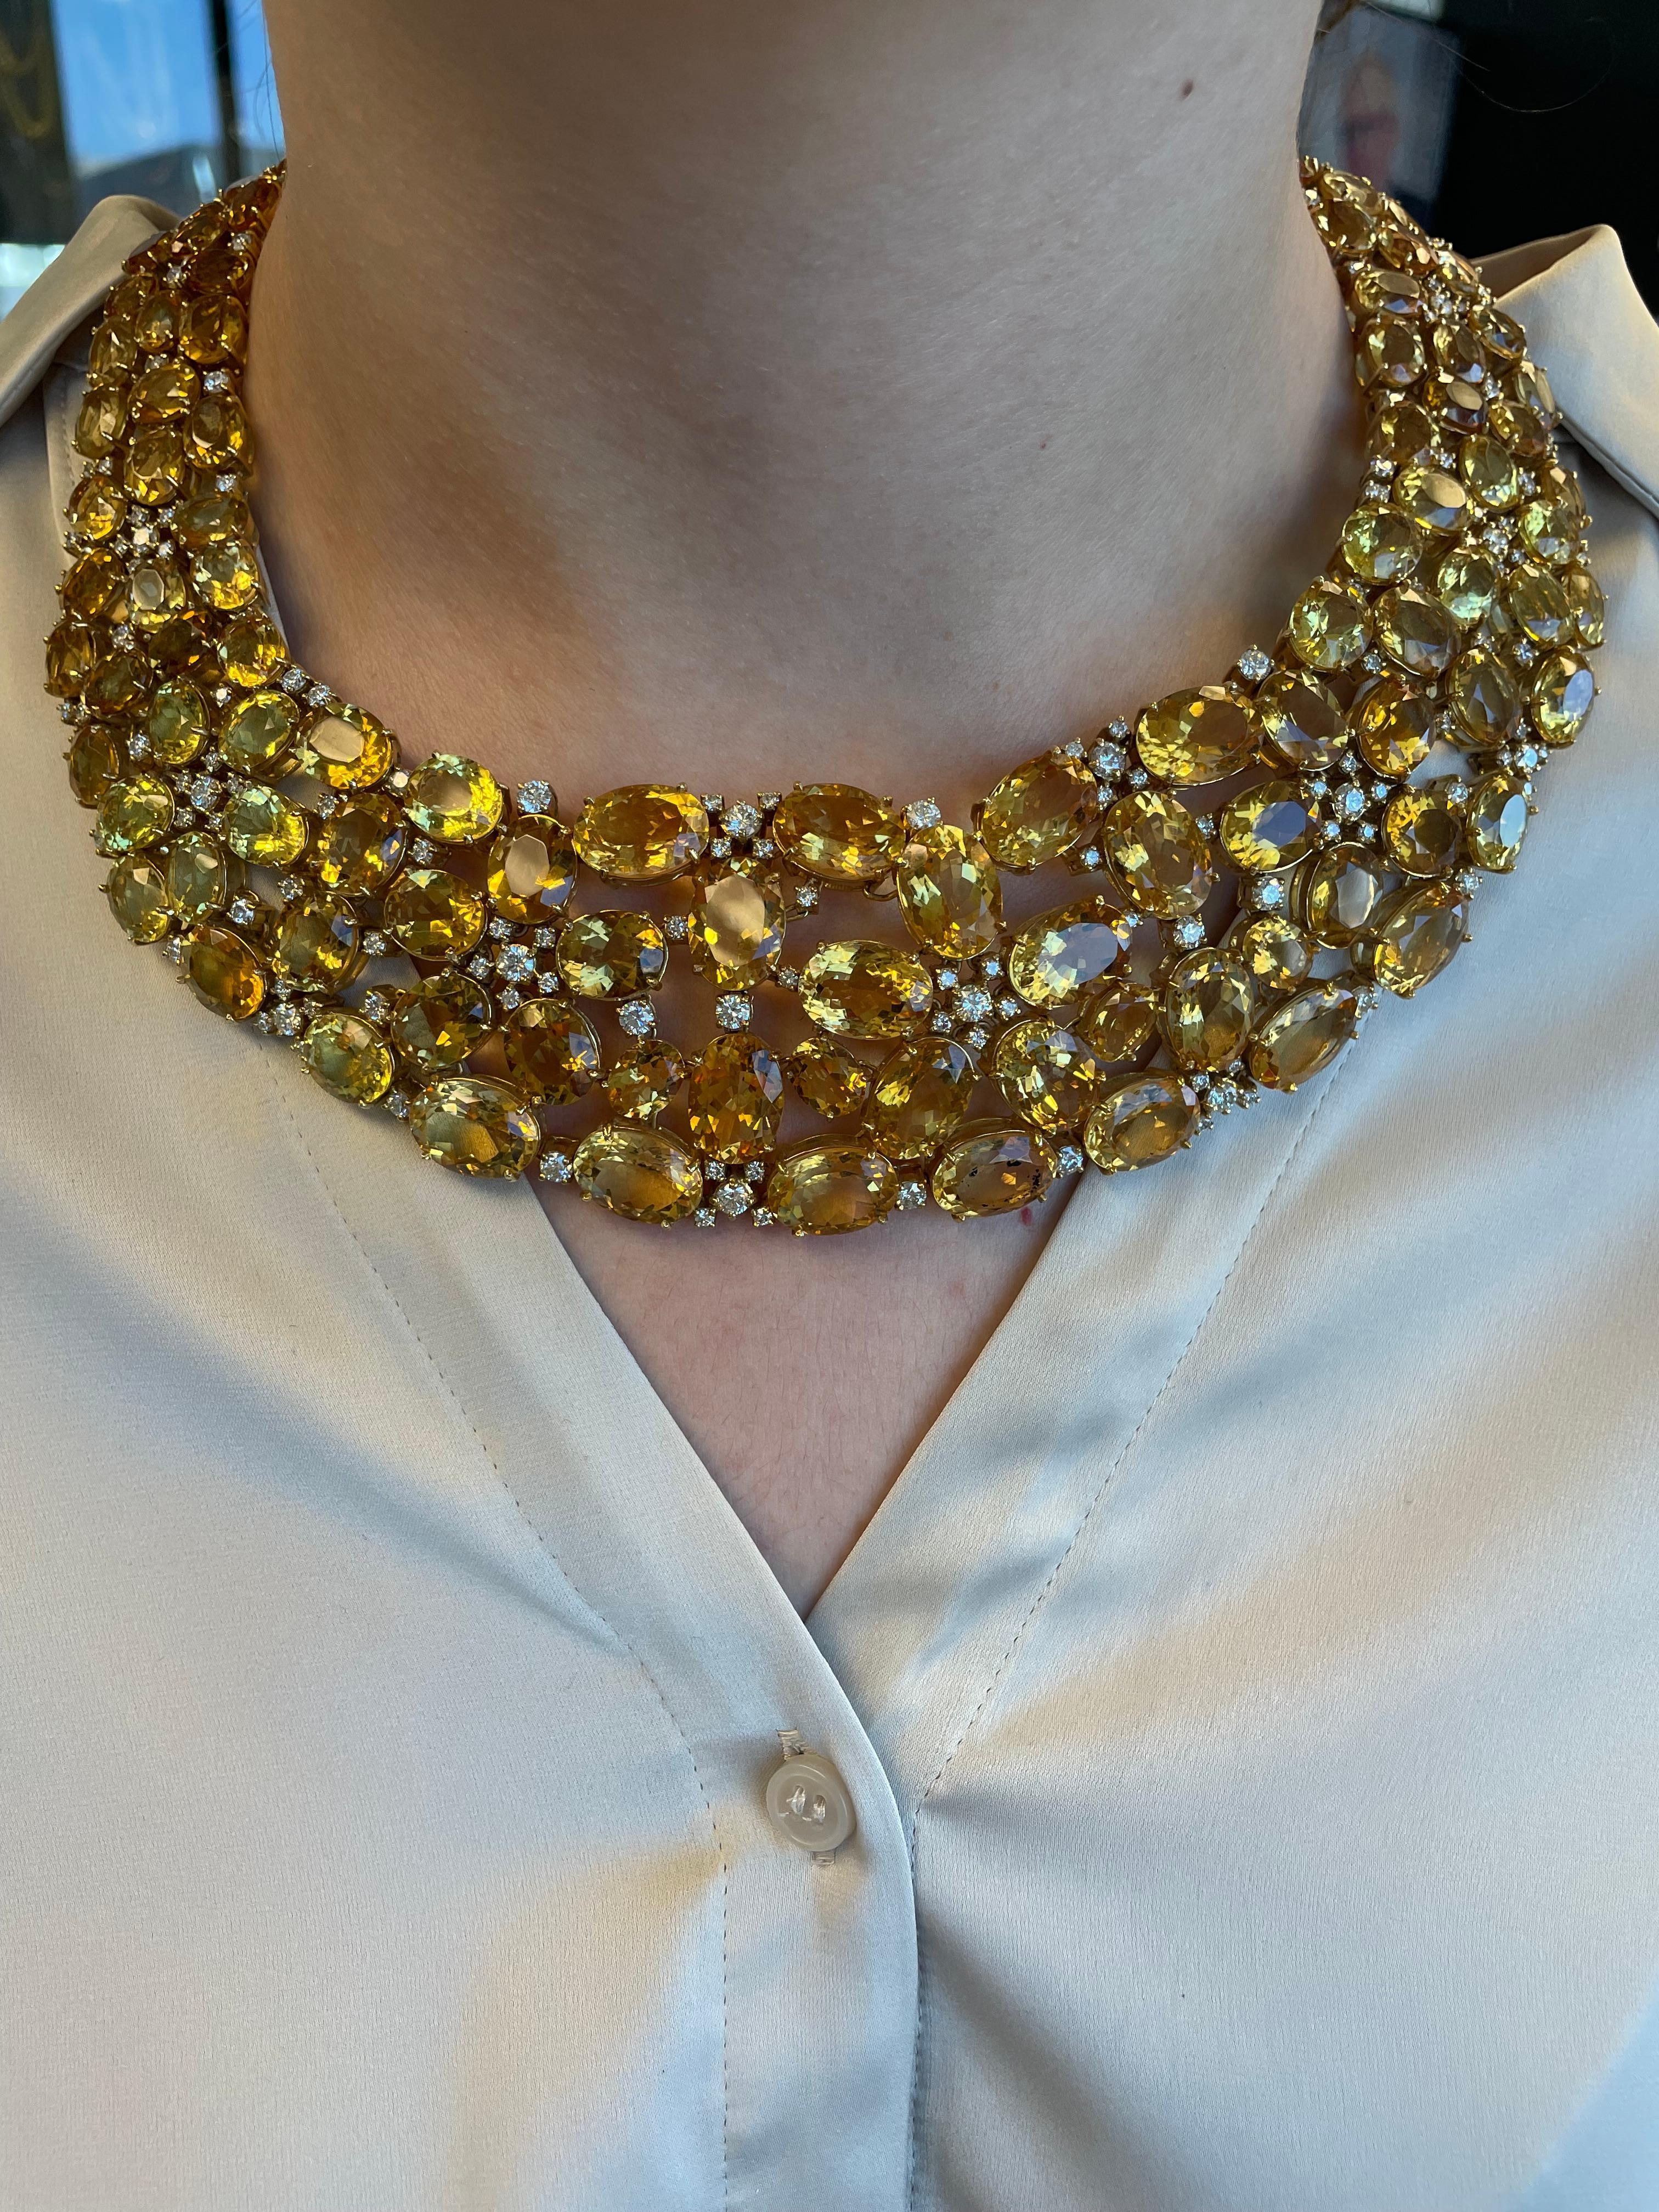 Stunning statement yellow heliodor beryl and diamond grand necklace. 
55.00 carats of oval heliodor beryl. Complimented by 11.83 carats of round brilliant diamonds, approximately G/H color and SI clarity. 18-karat yellow gold.
66.83 carats total